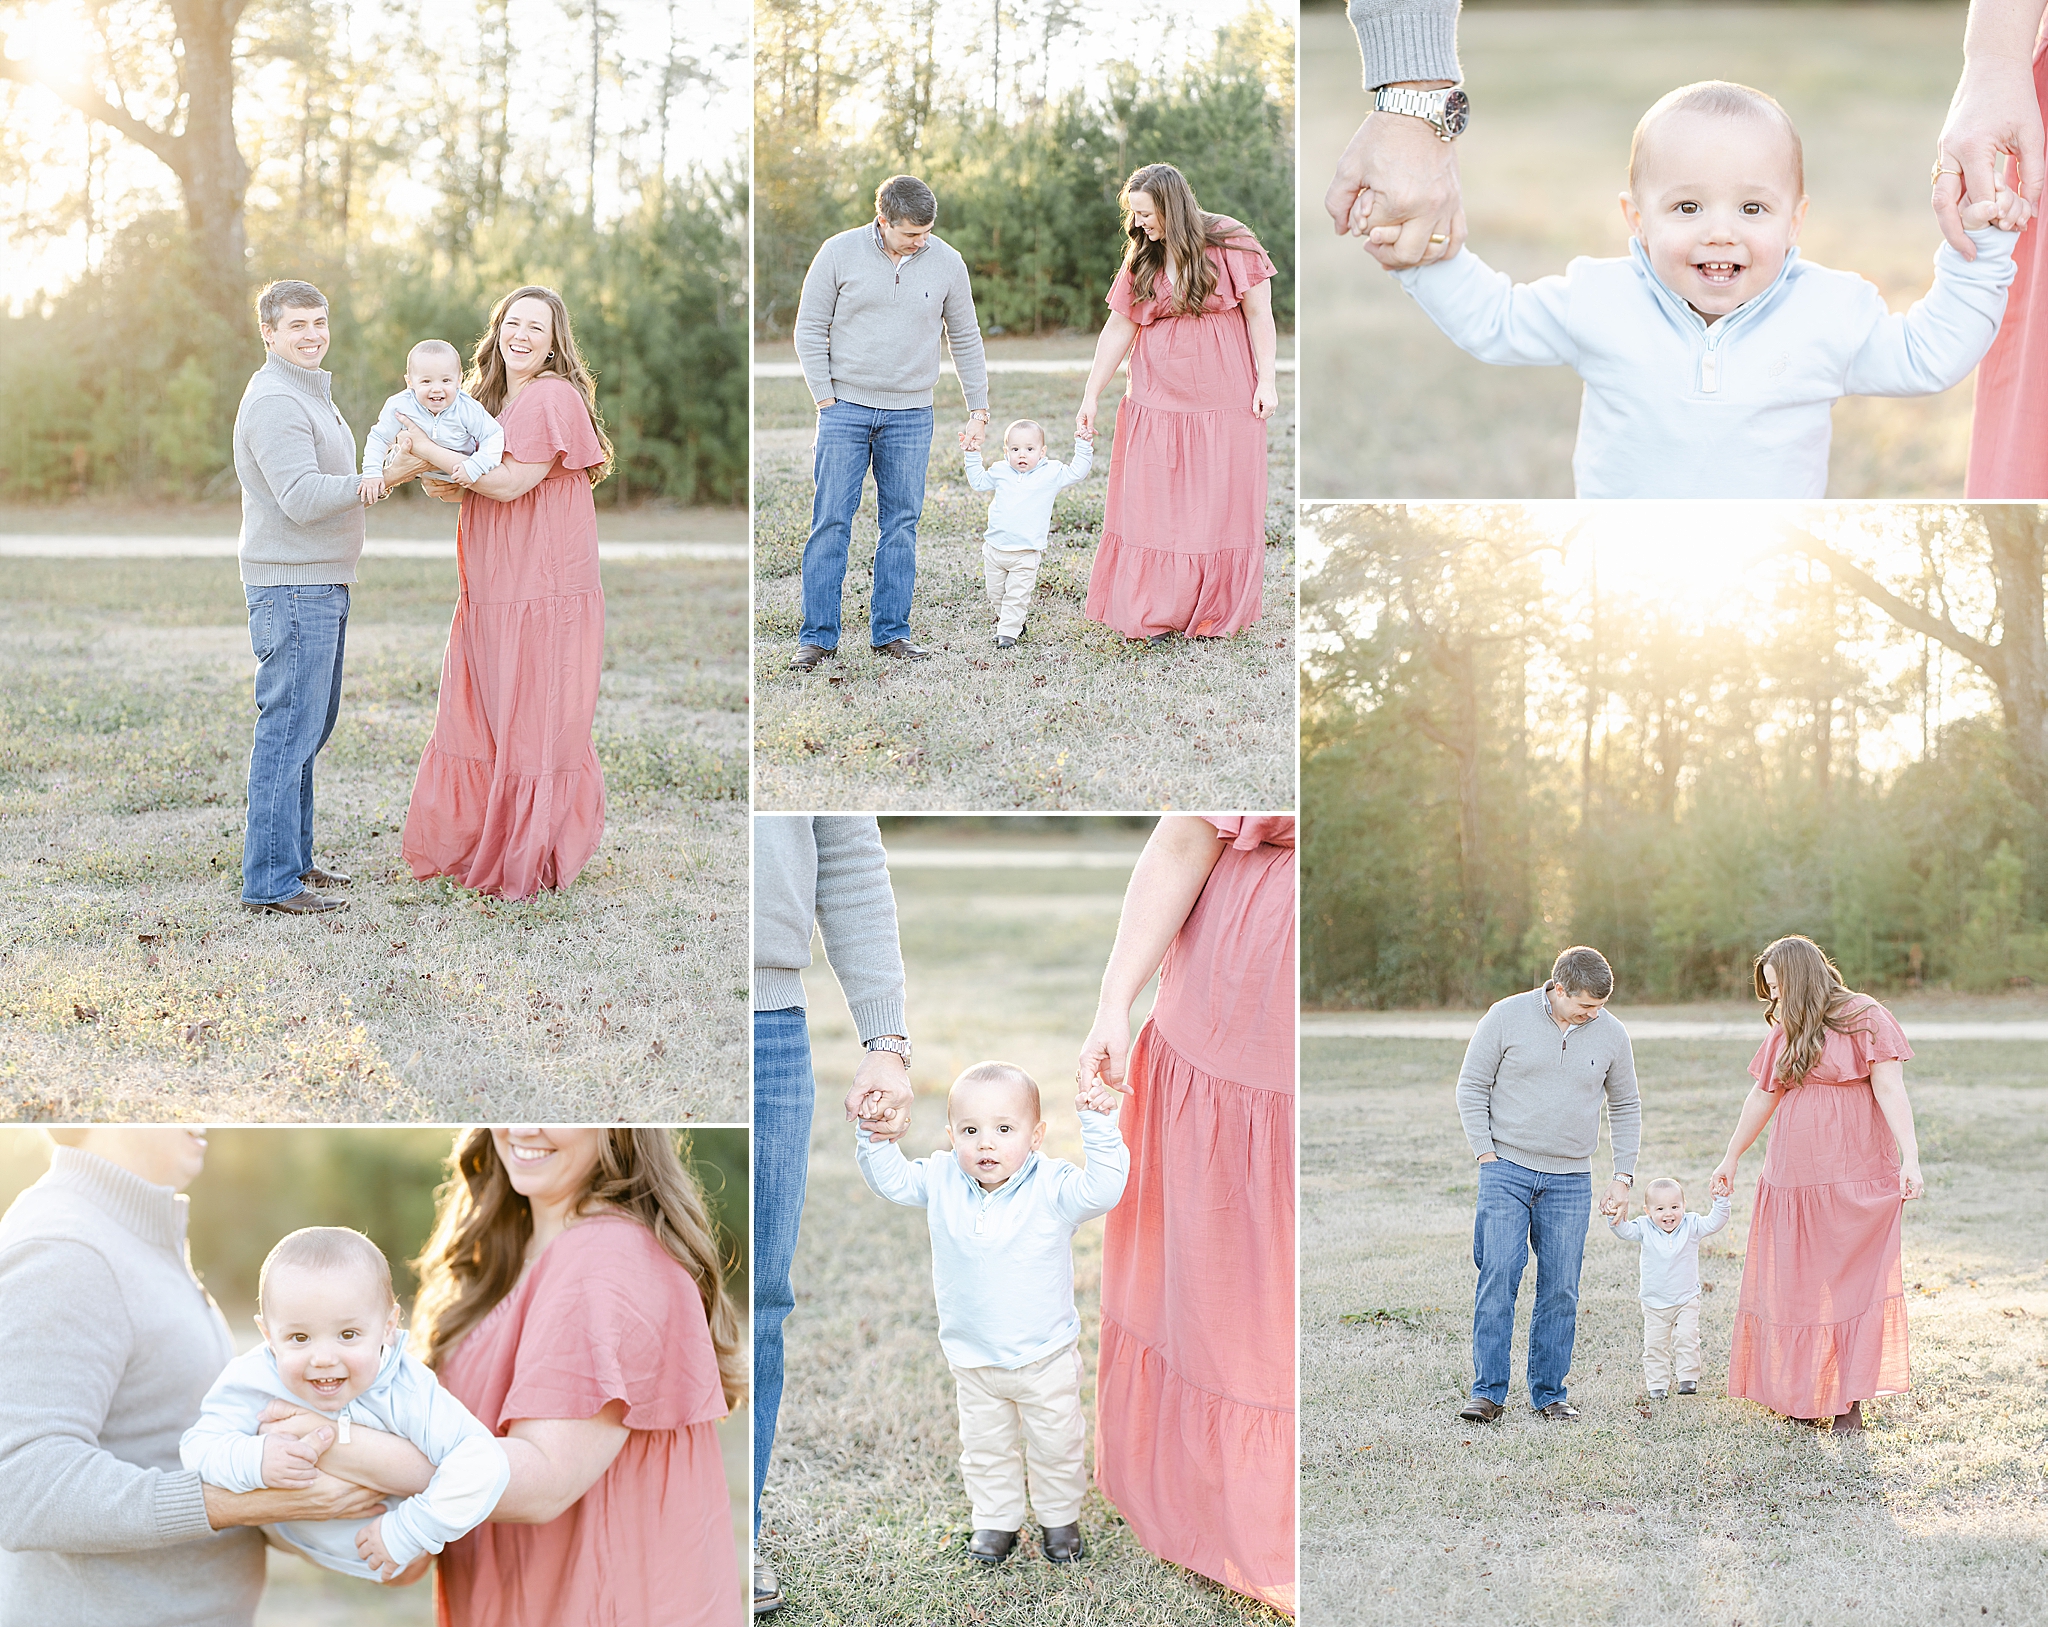 A mom and dad hold their baby boy's hands and play together during their outdoor family session at sunset in Hattiesburg, MS. Photo by Emily Lofton Photography.